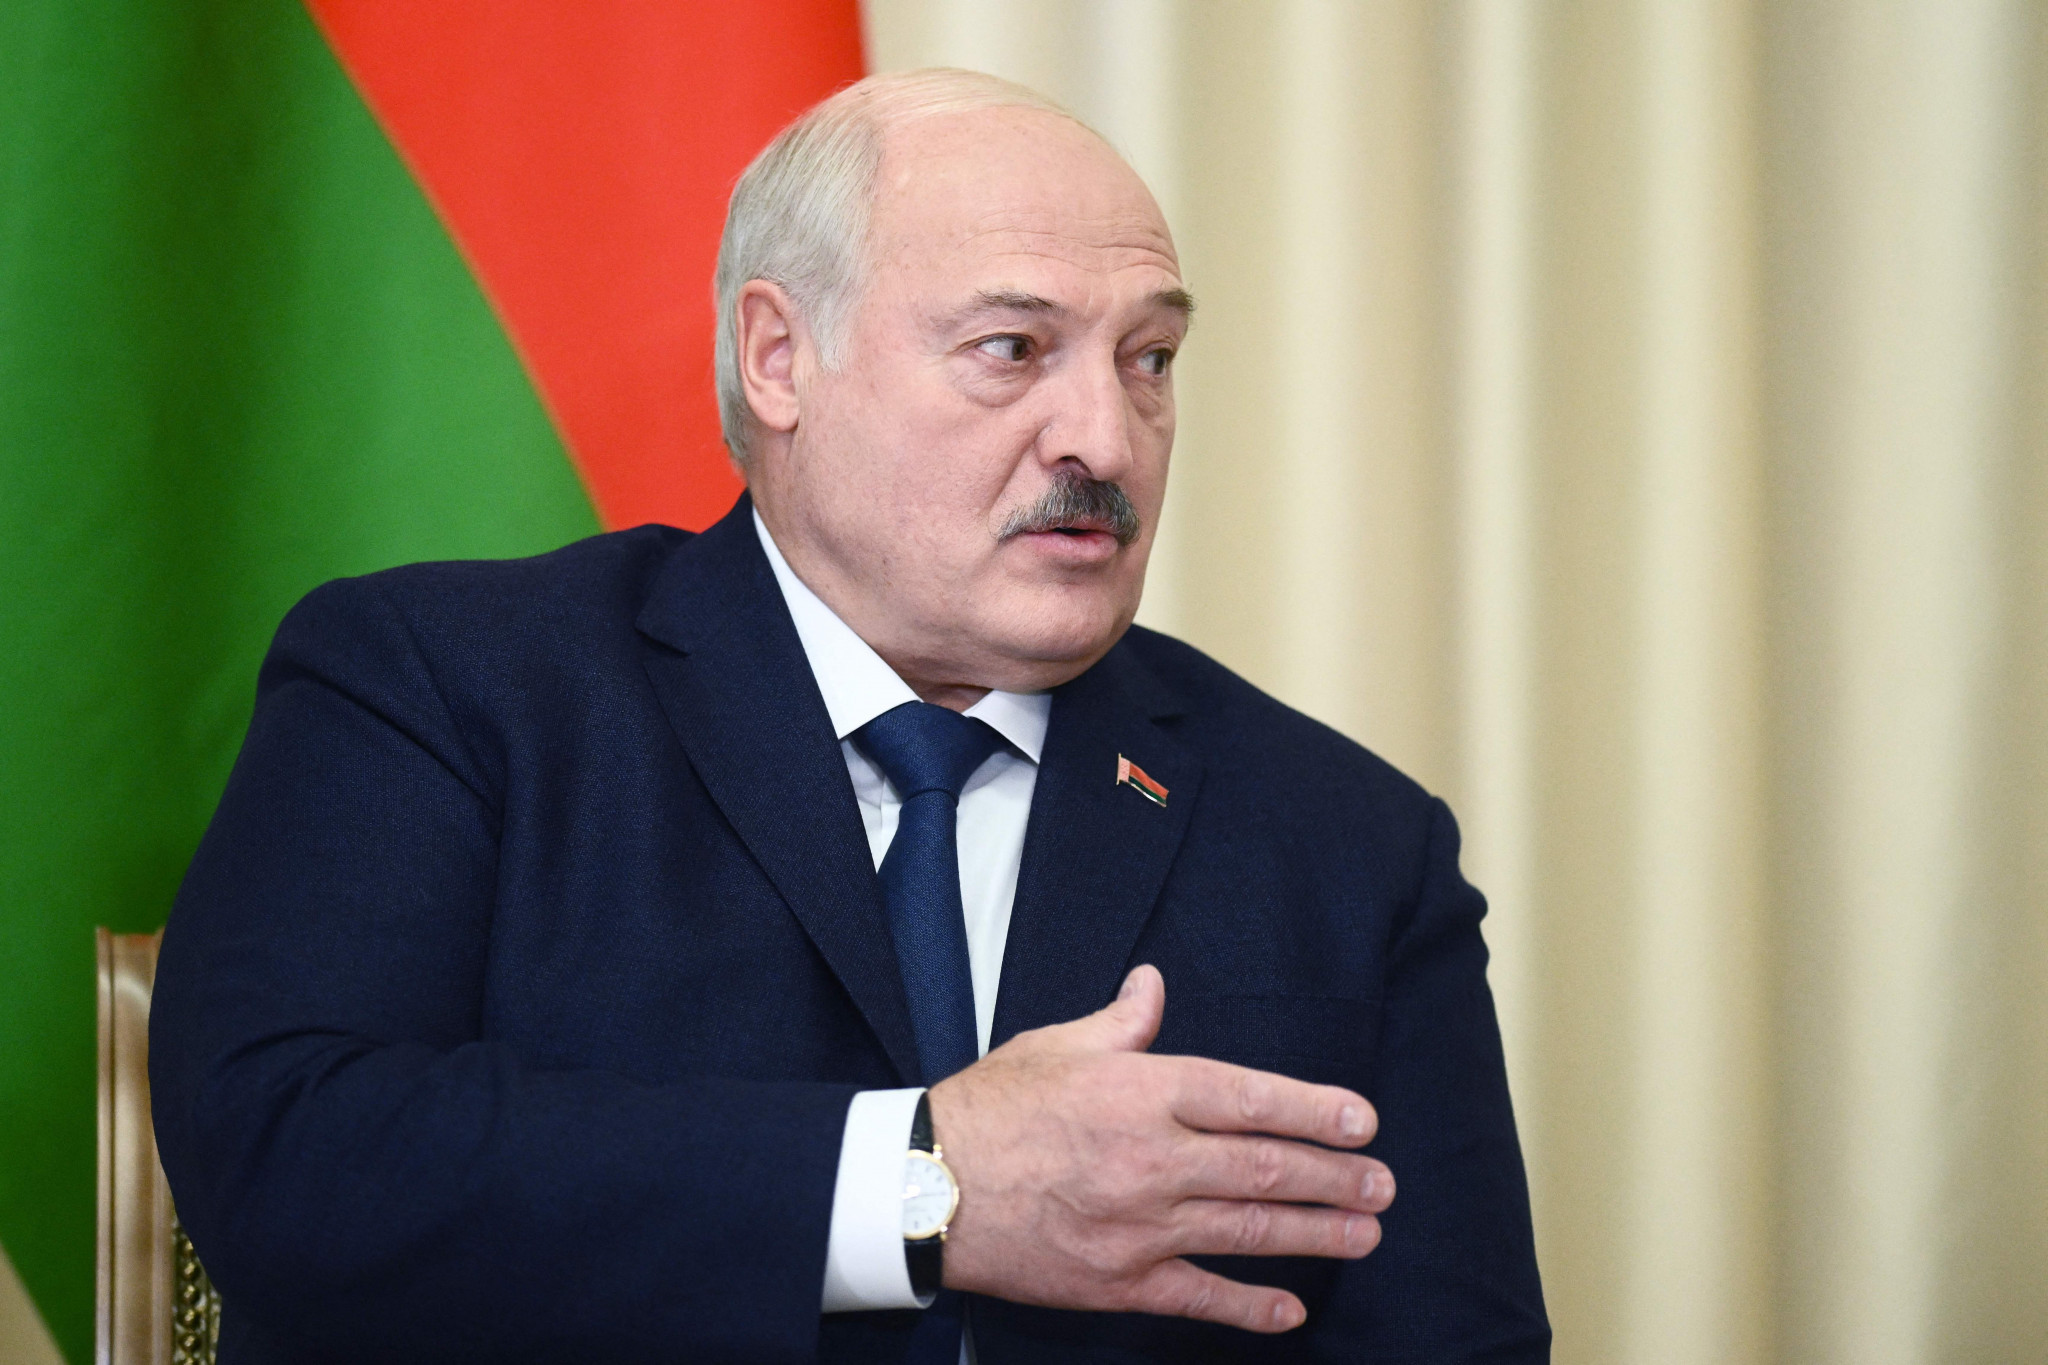 Lukashenko claims Belarusian athletes competing under neutral flag would still be patriots